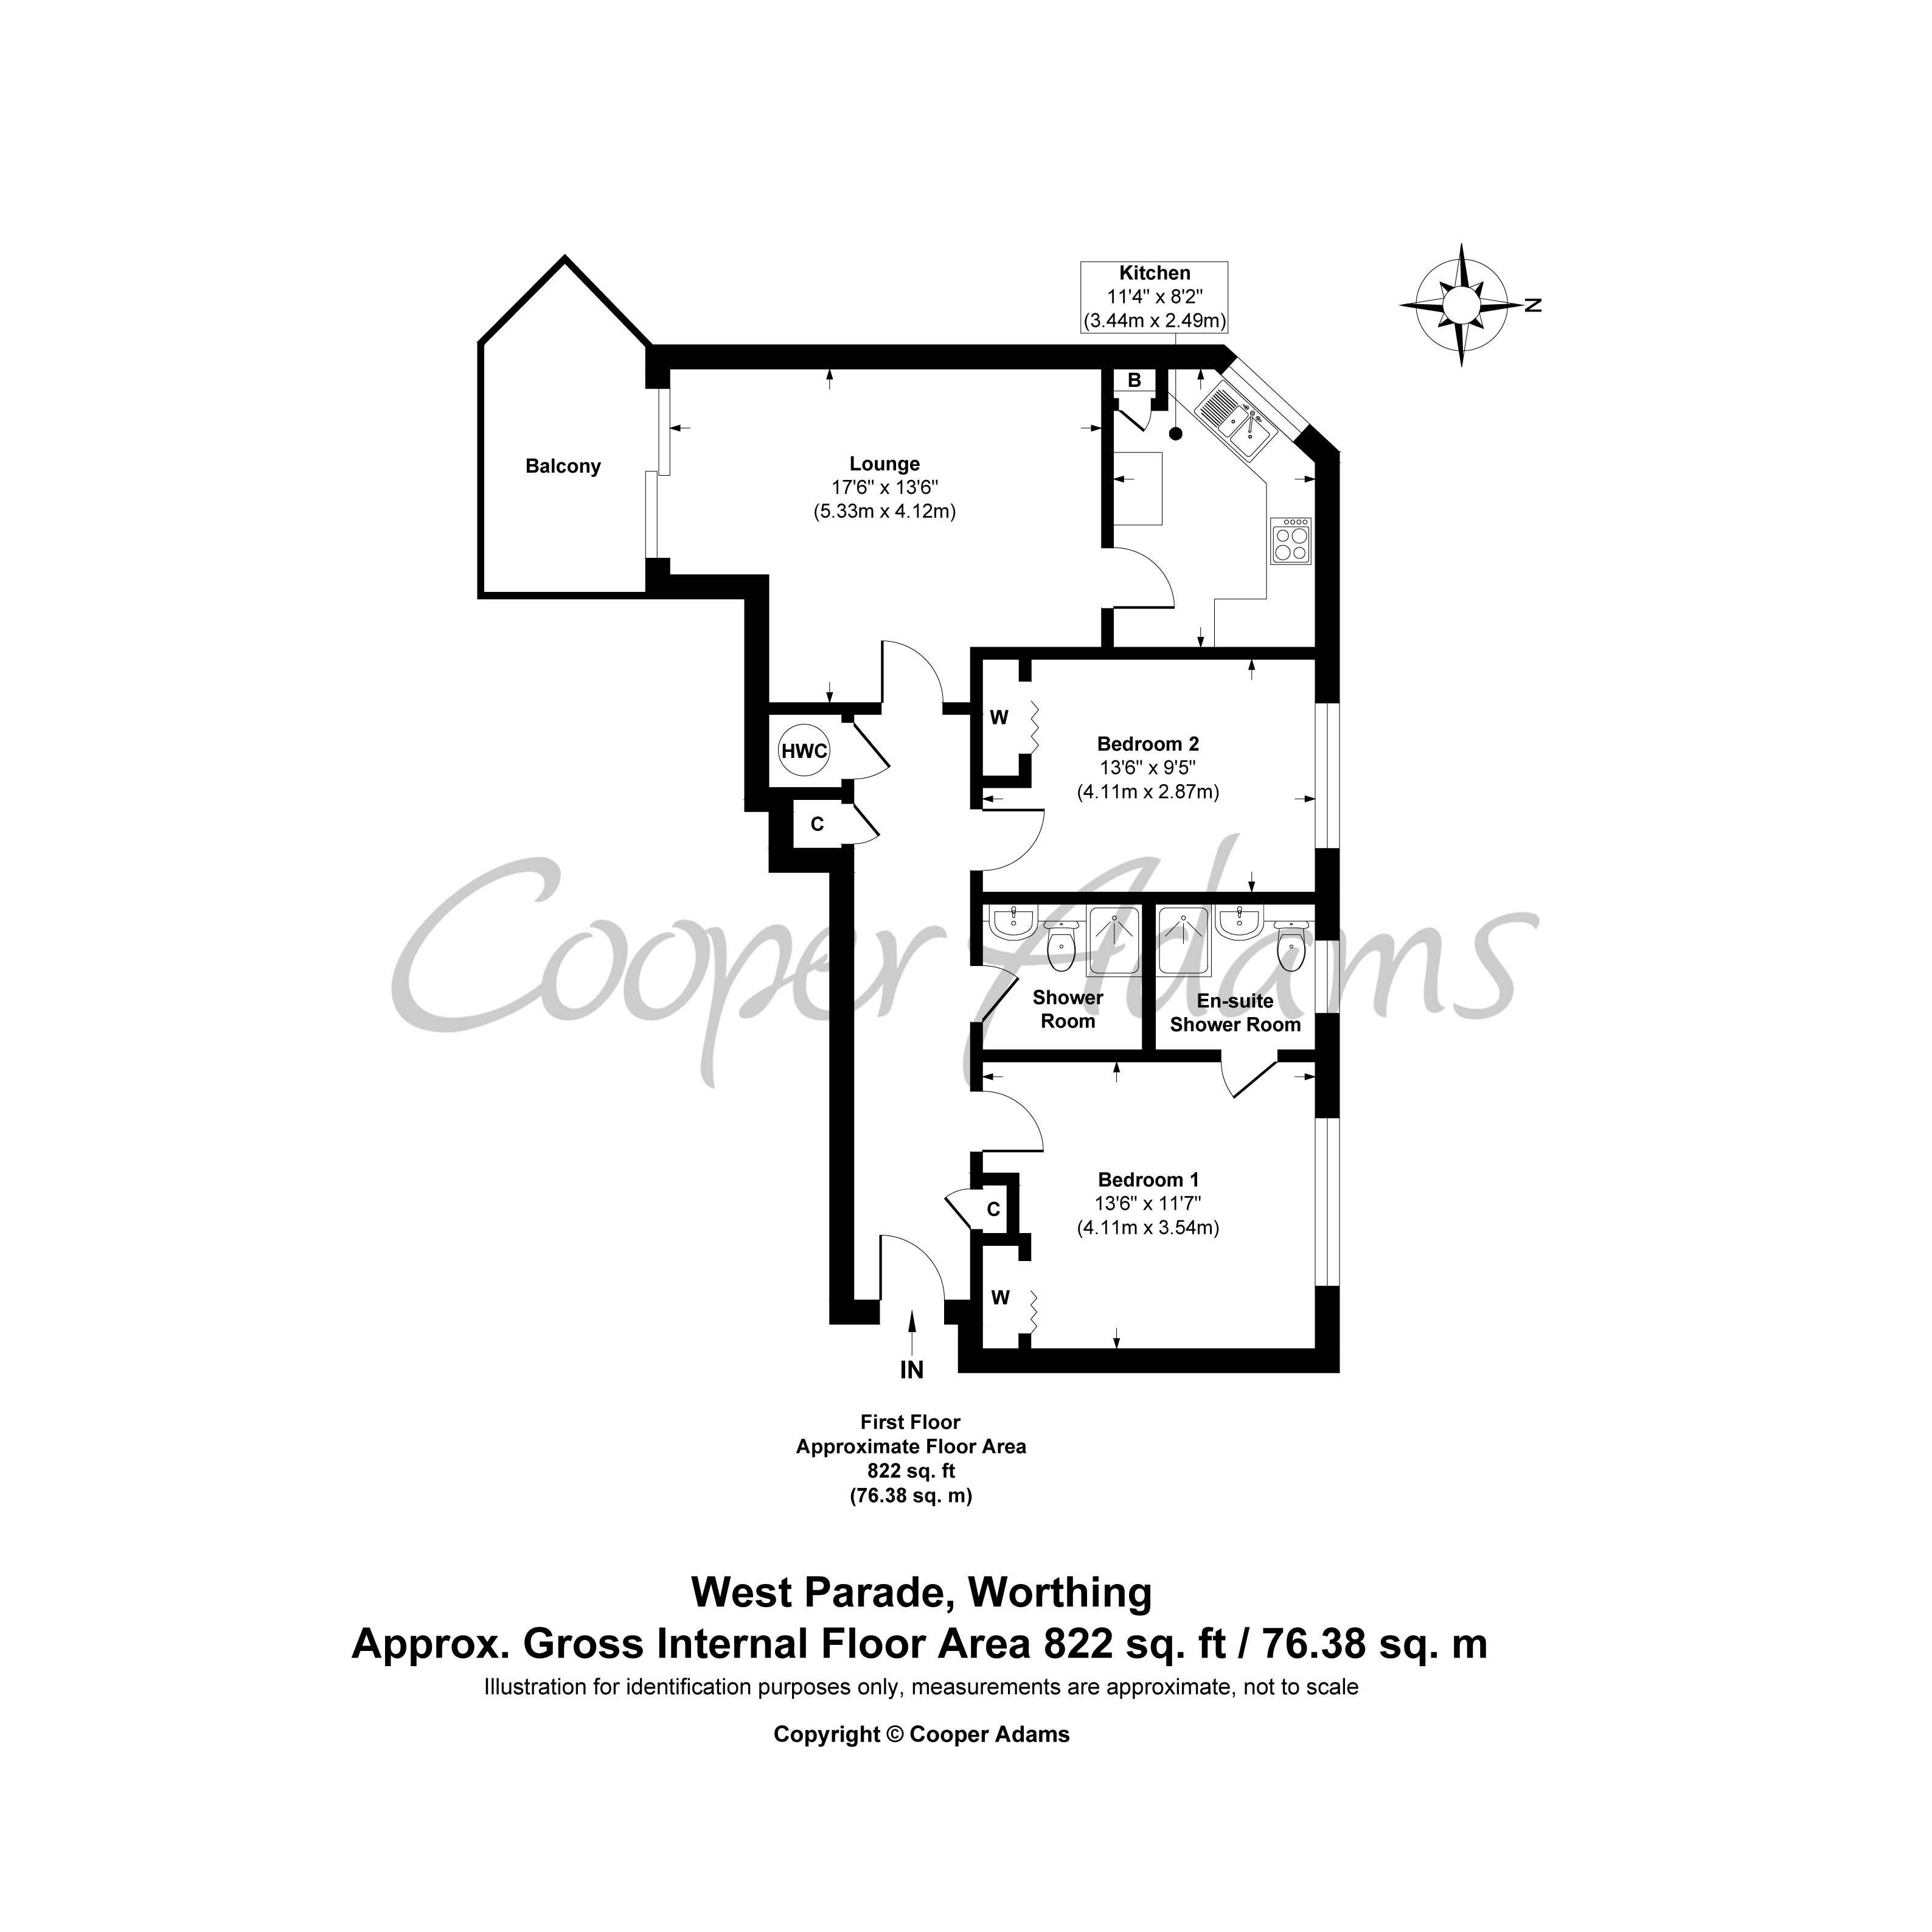 2 bed apartment for sale in West Parade, Worthing - Property floorplan